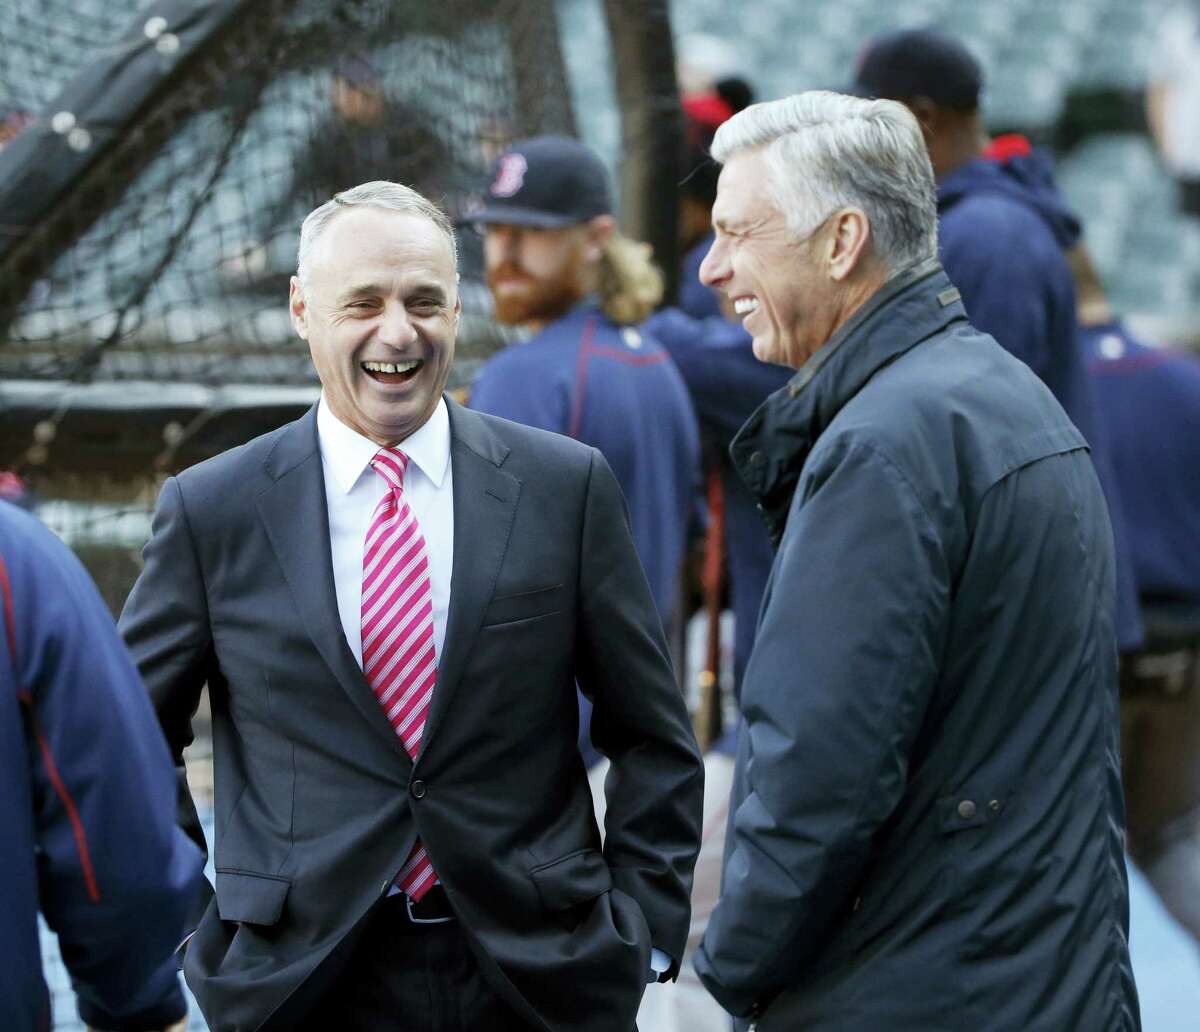 Major League Baseball commissioner Rob Manfred, left, said recently that expansion was in baseball’s future. Register columnist Chip Malafronte likes the idea so much, he came up with his own 32-team realignment.